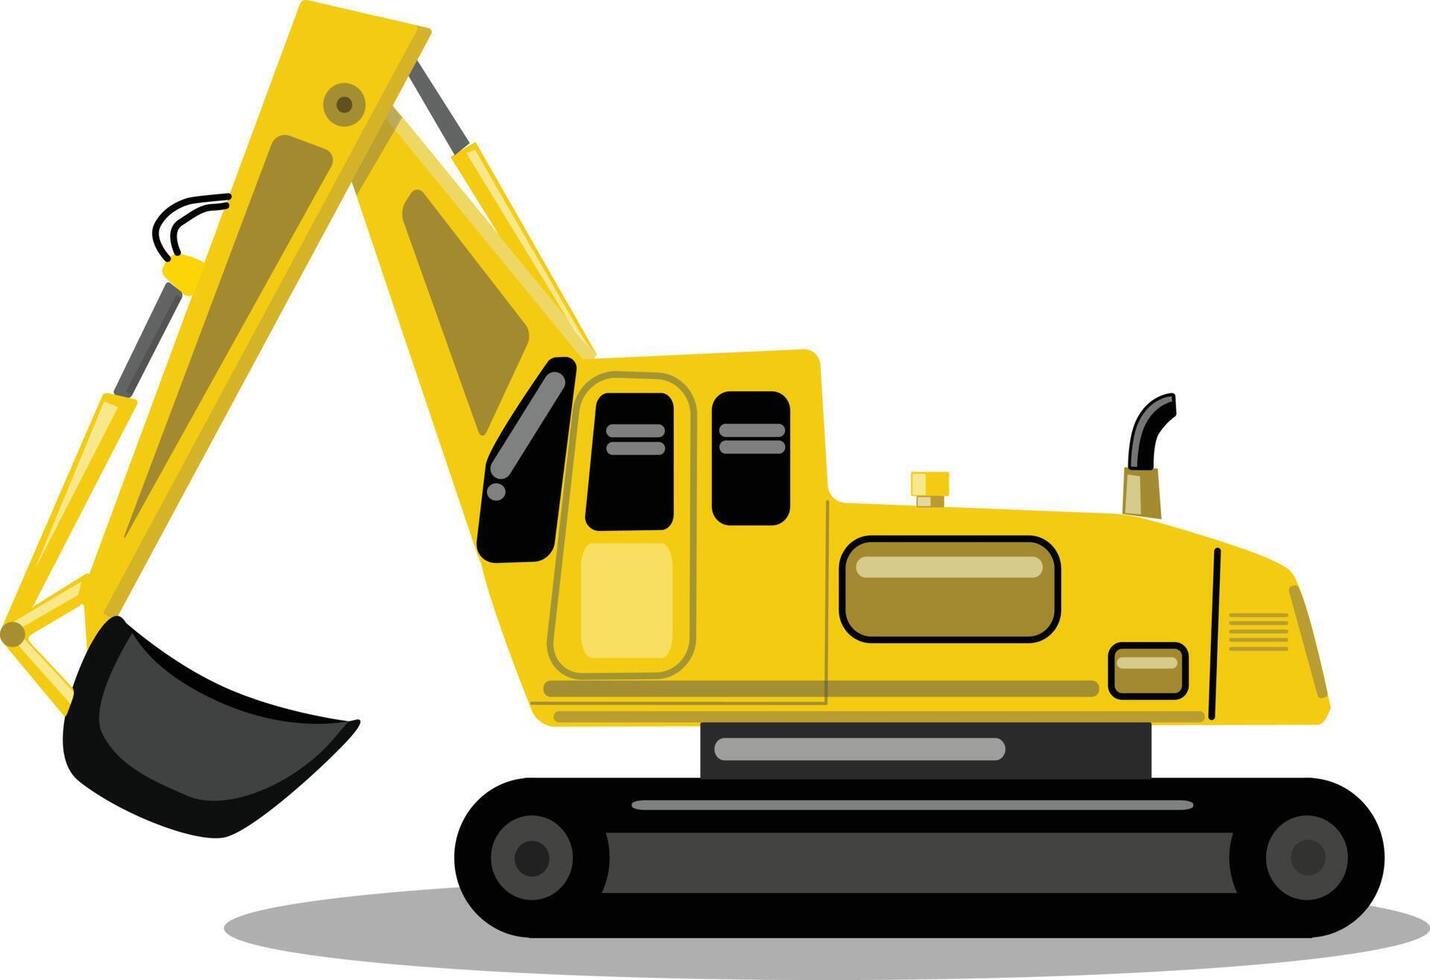 an excavator toy in yellow color in cartoon style vector